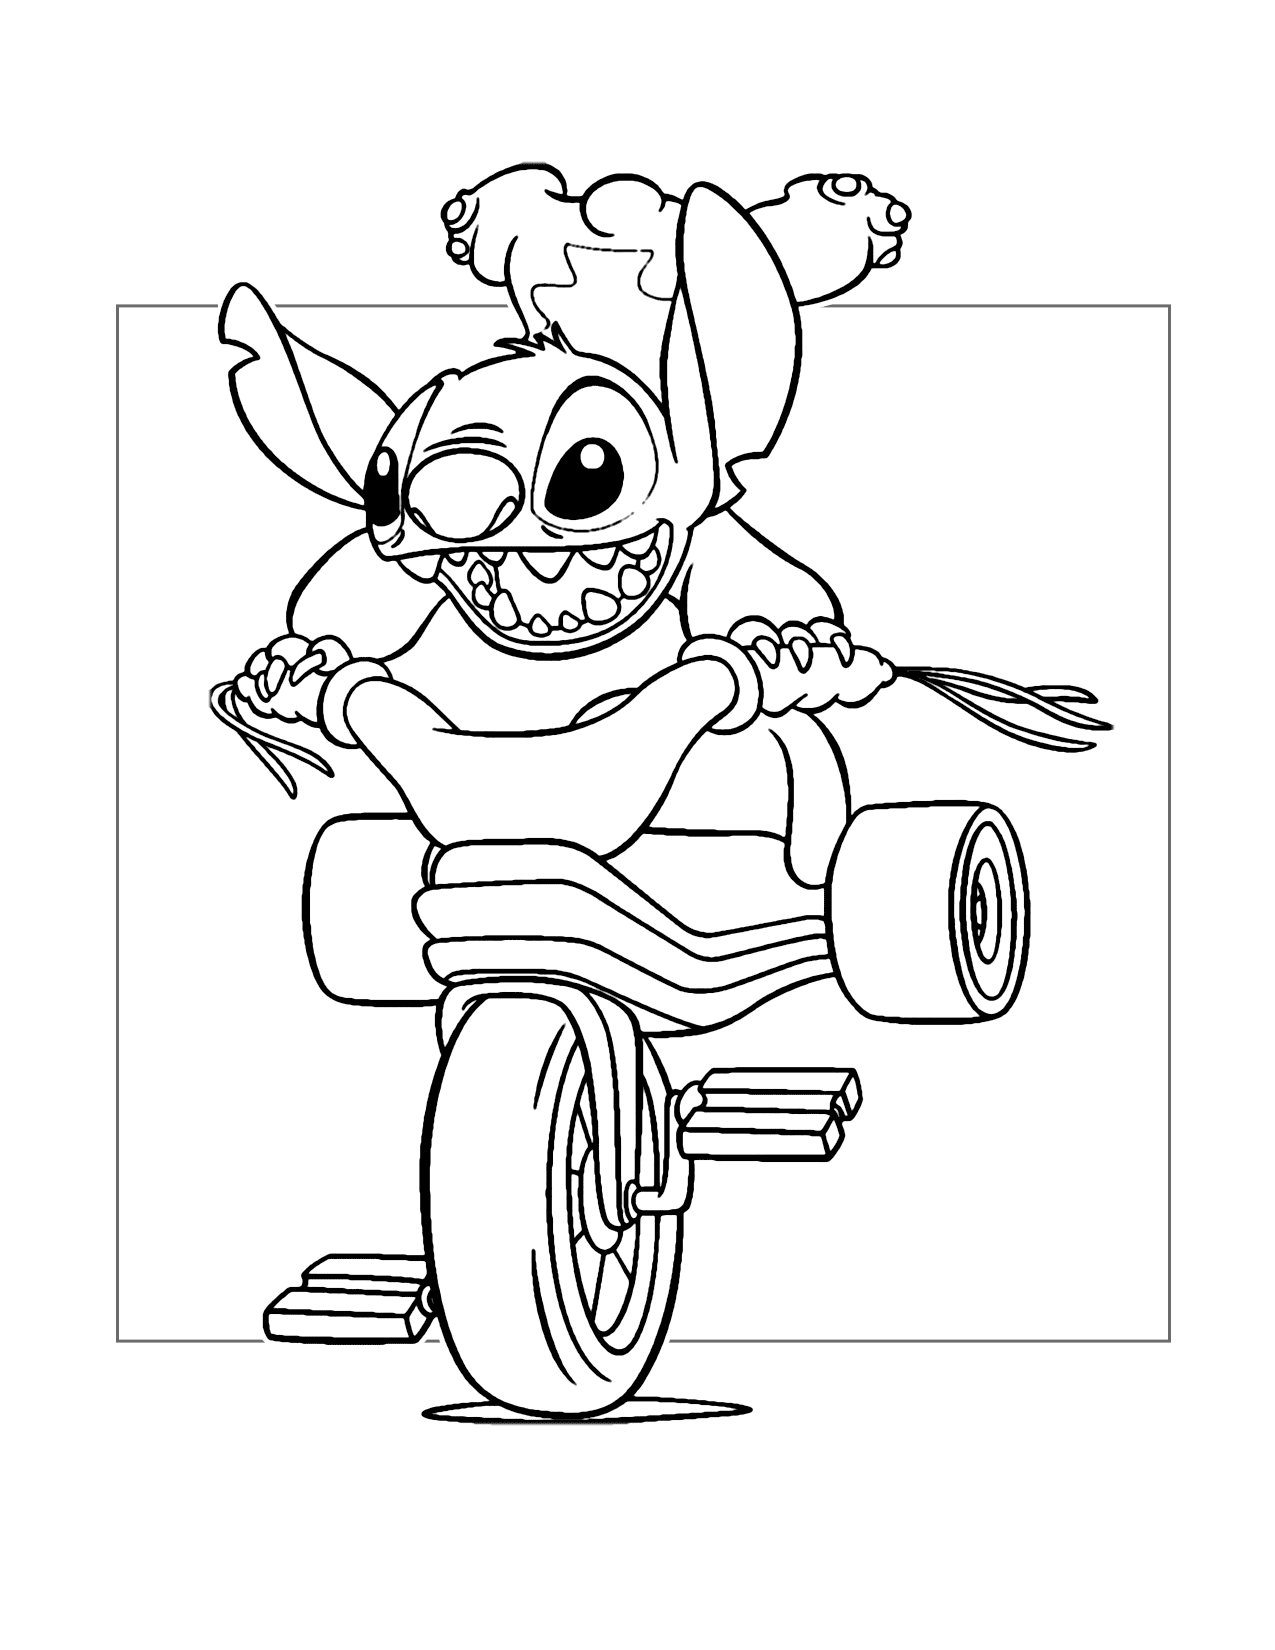 Stitchs Wild Ride Coloring Page